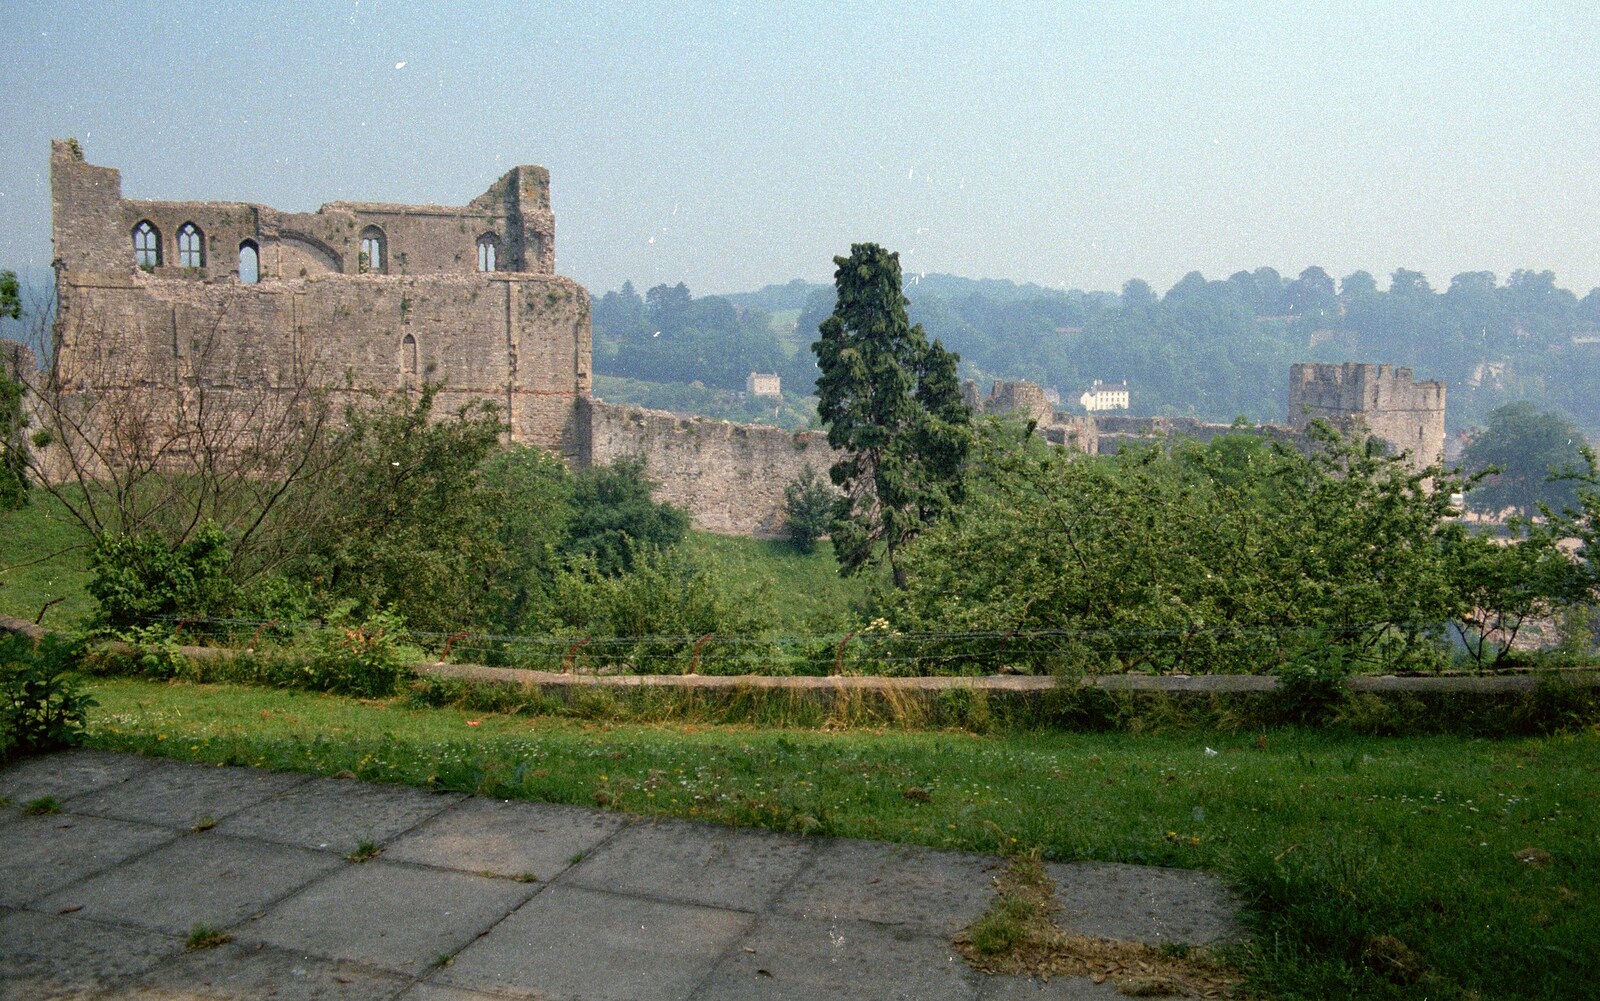 Chepstow Castle from A Trip to Chepstow, Monmouthshire, Wales - 5th July 1986